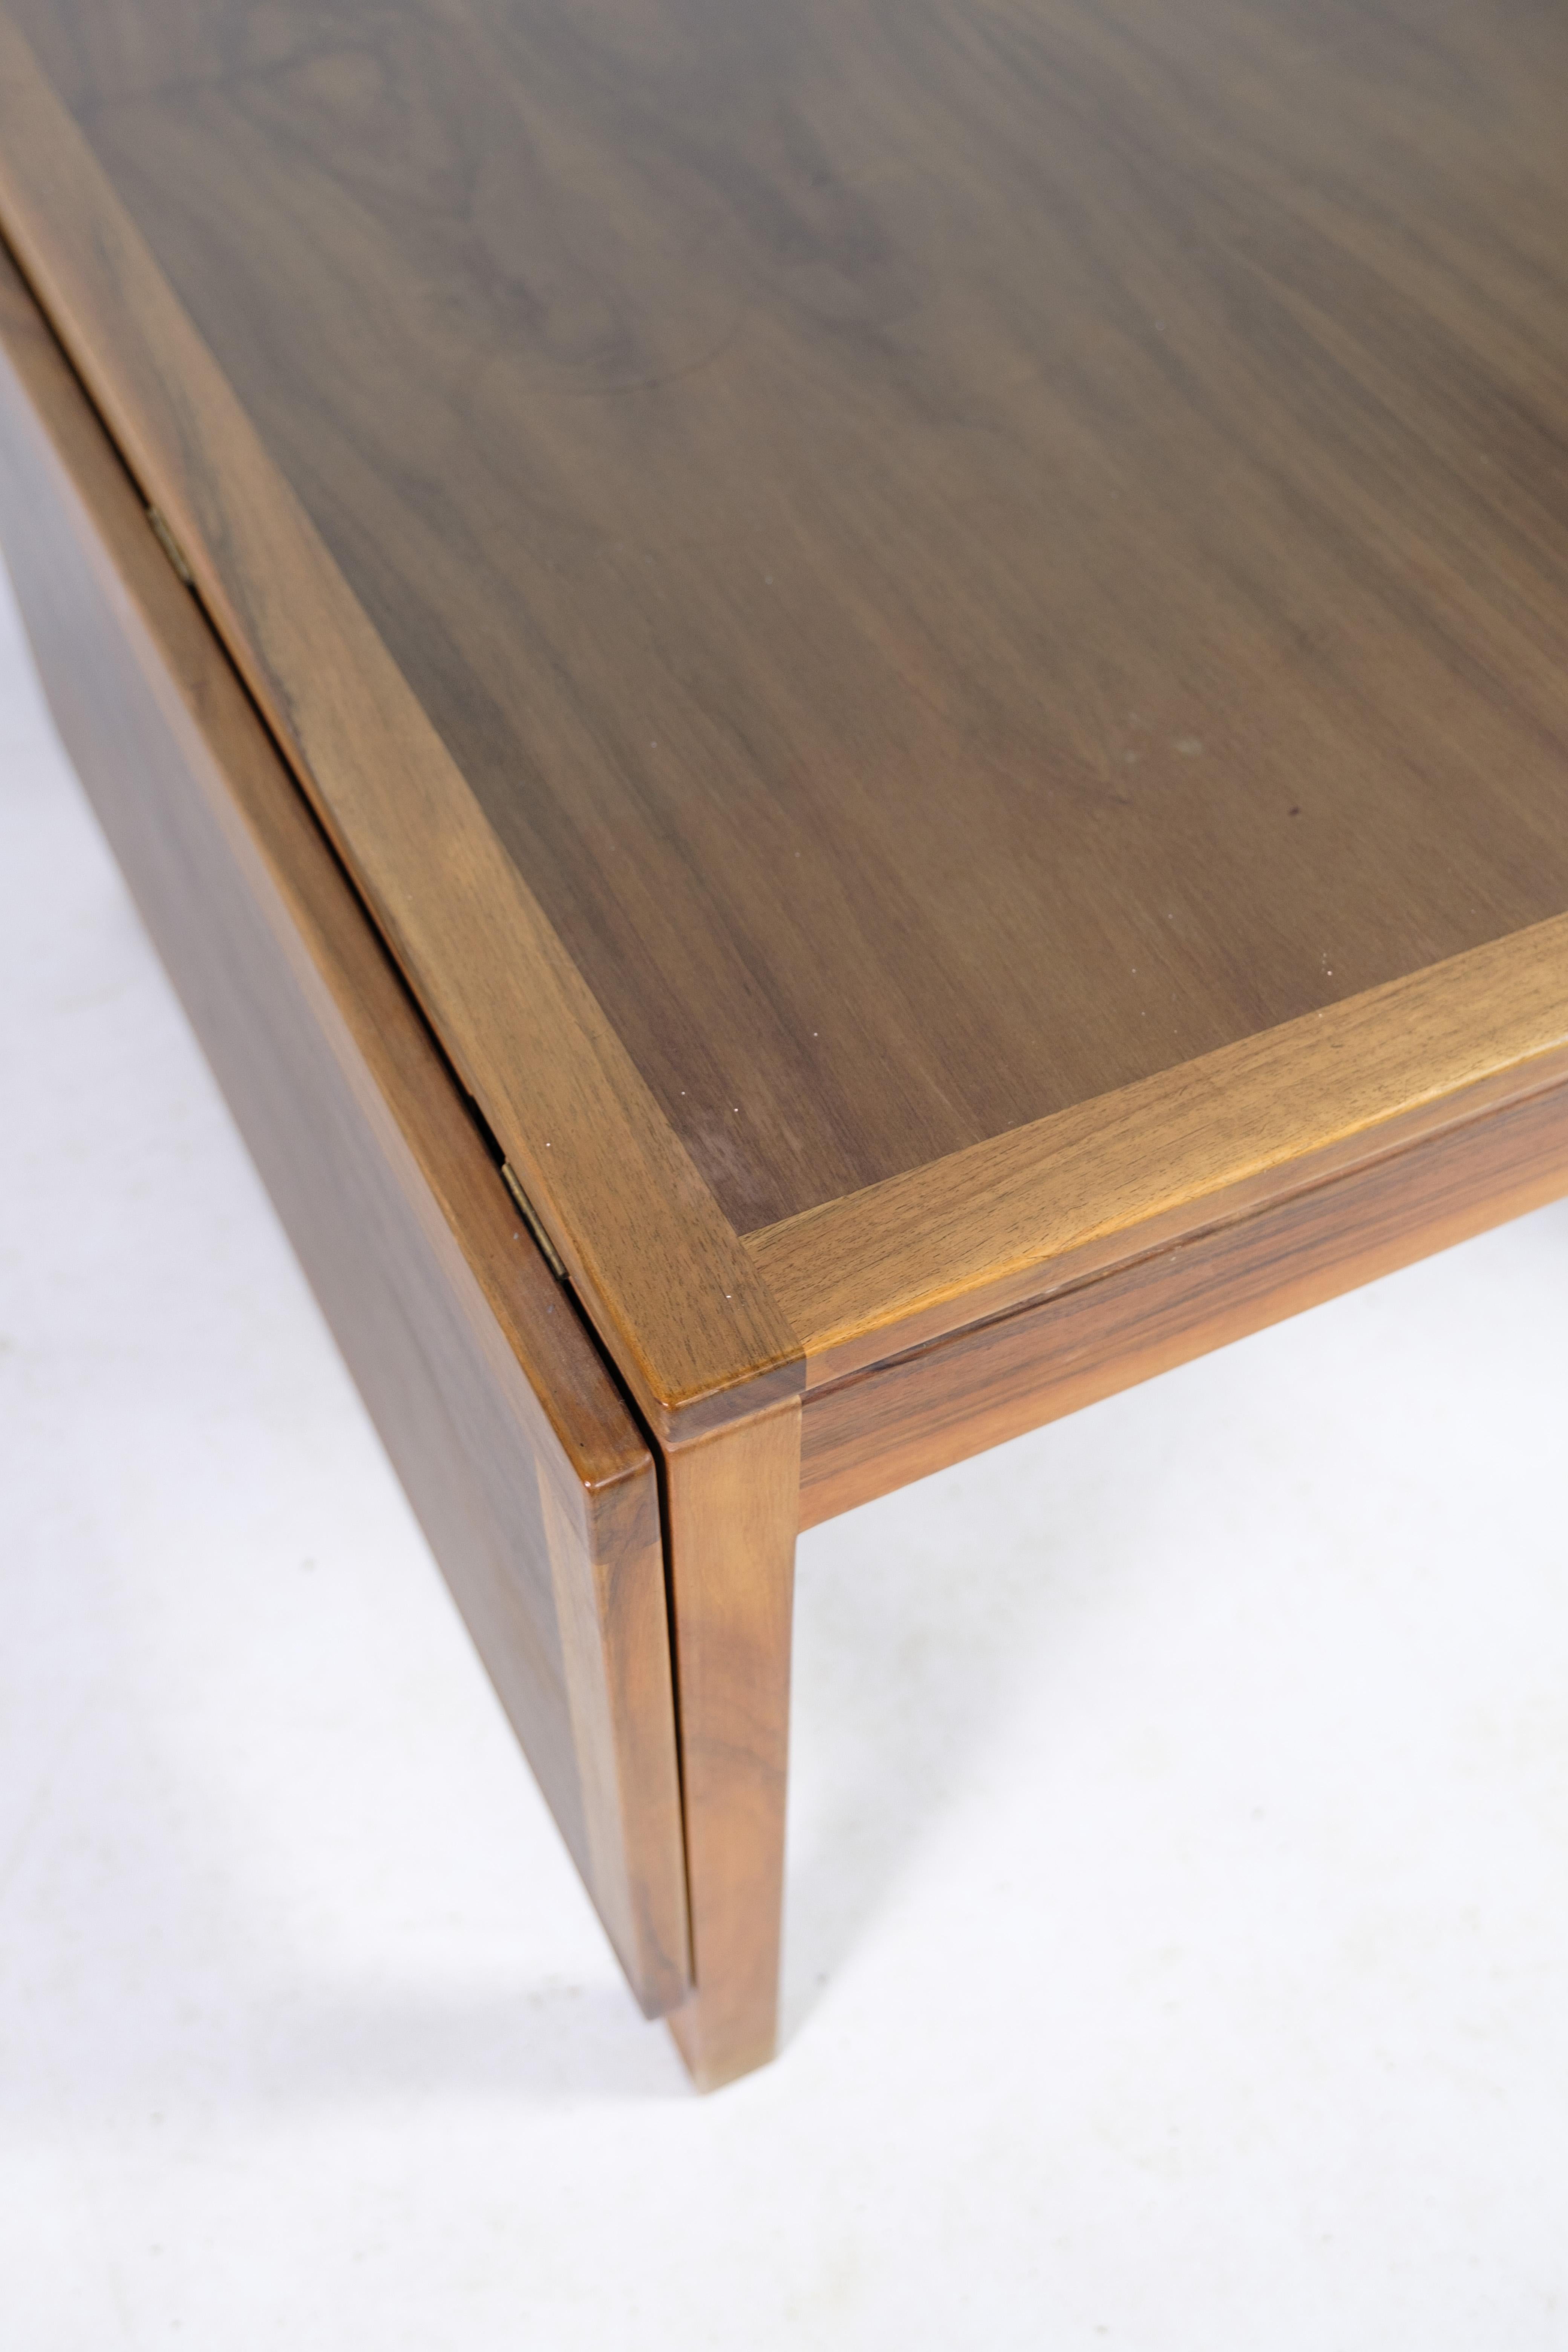 Danois Coffee Table, Model 5362 By Børge Mogensen Made By Fredericia Furniture 1960s en vente